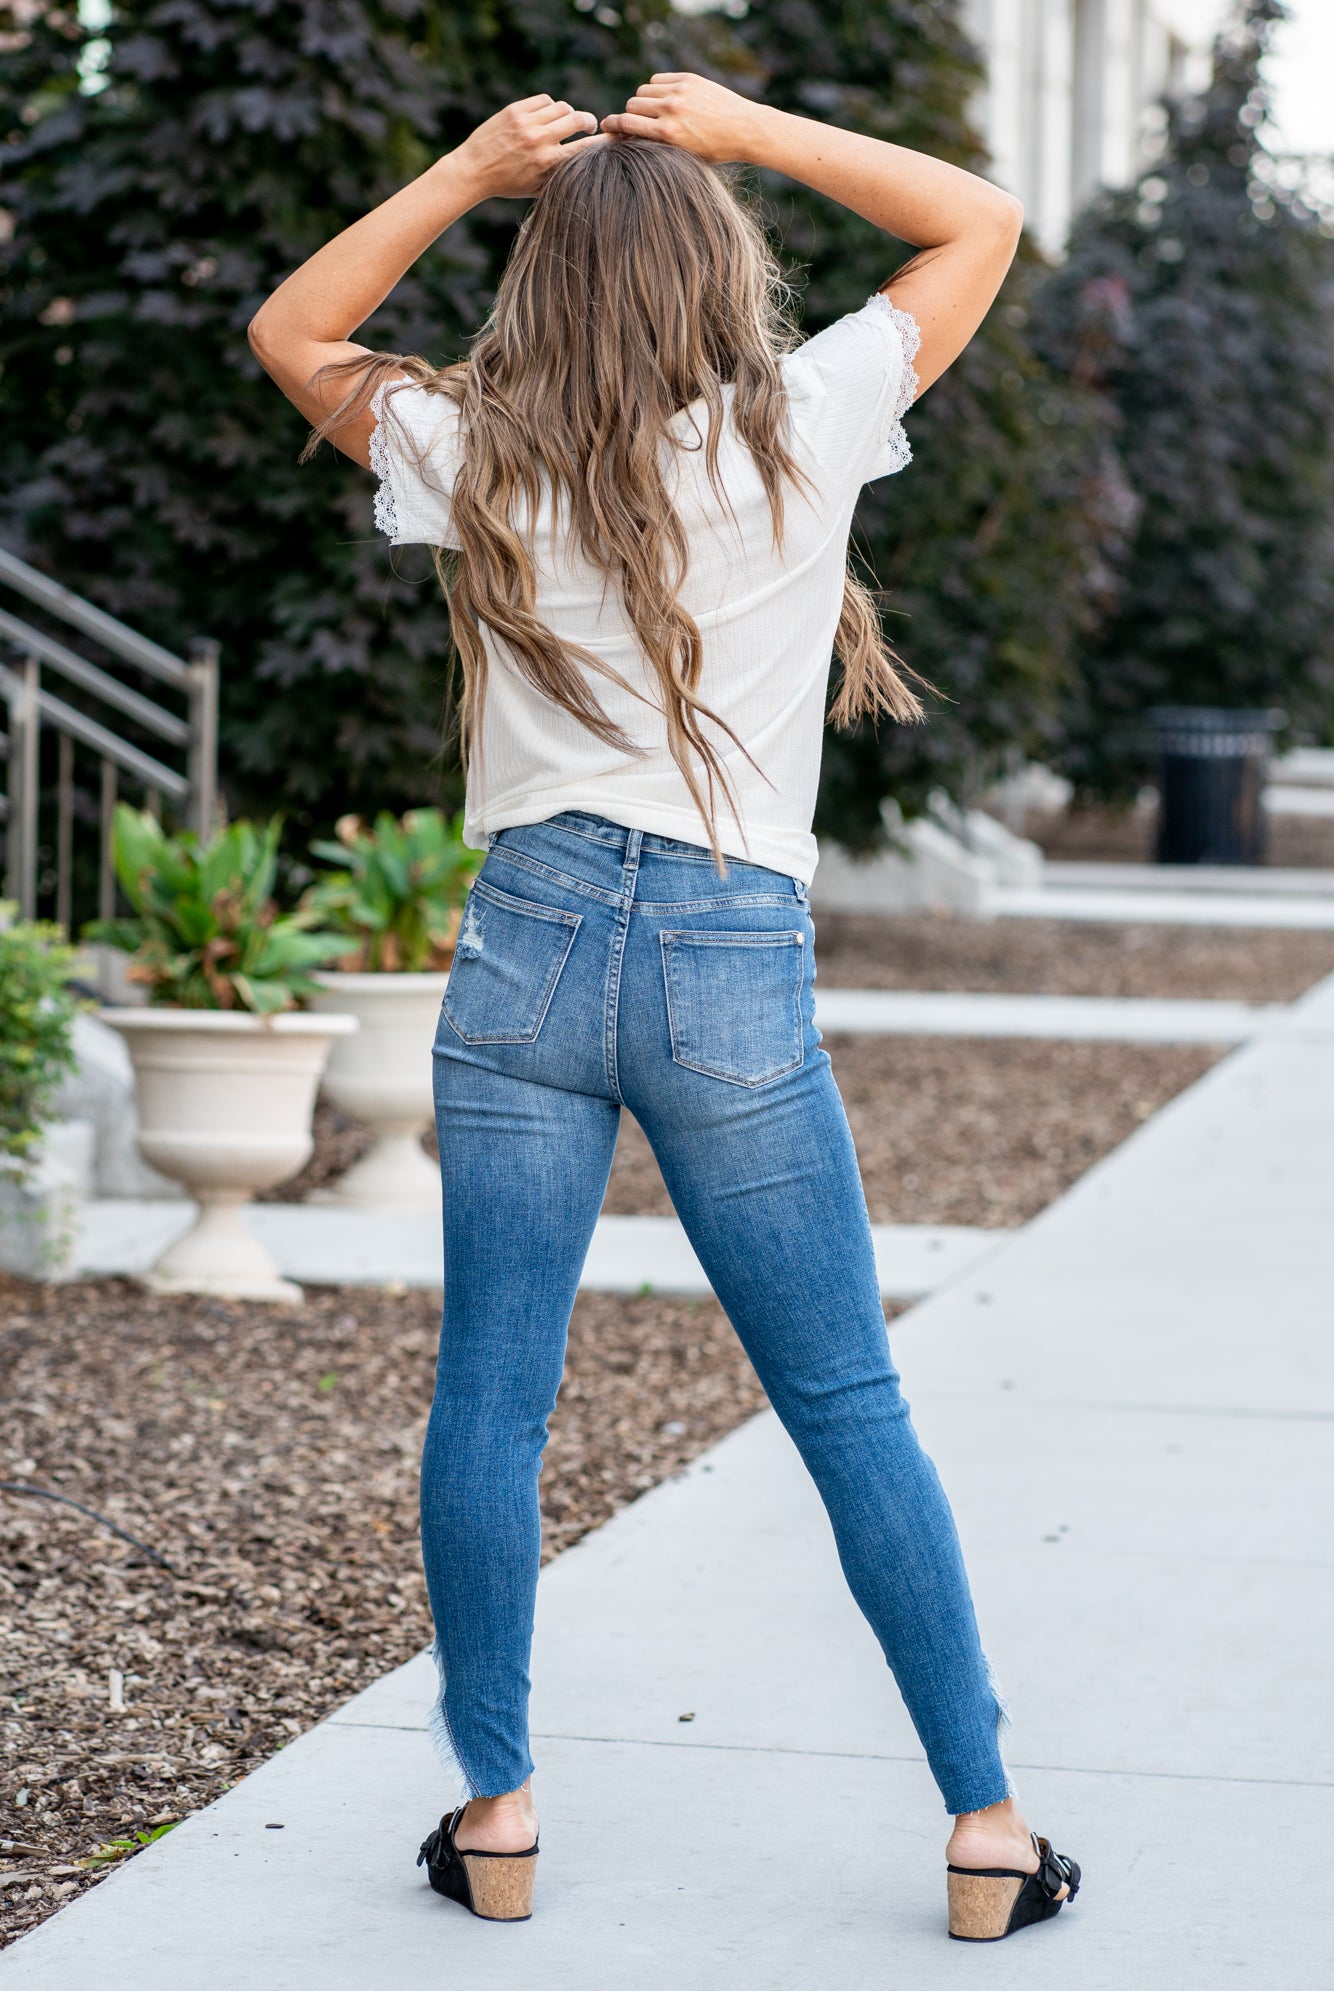 Judy Blue  Don't be afraid to wear high-waisted jeans with a medium blue wash and split hem detail, these will be your everyday go-to denim.   Color: Medium Wash Cut: Skinny, 28.5" Inseam*  Rise: High Rise 10.5" Front Rise* Material: 93% Cotton, 6% Polyester, 1% Spandex Machine Wash Separately In Cold Water Stitching: Classic Fly: Zipper Style #: JB88459 | 88459 *Measured on the smallest size, measurements may vary by size.  Contact us for any additional measurements or sizing.